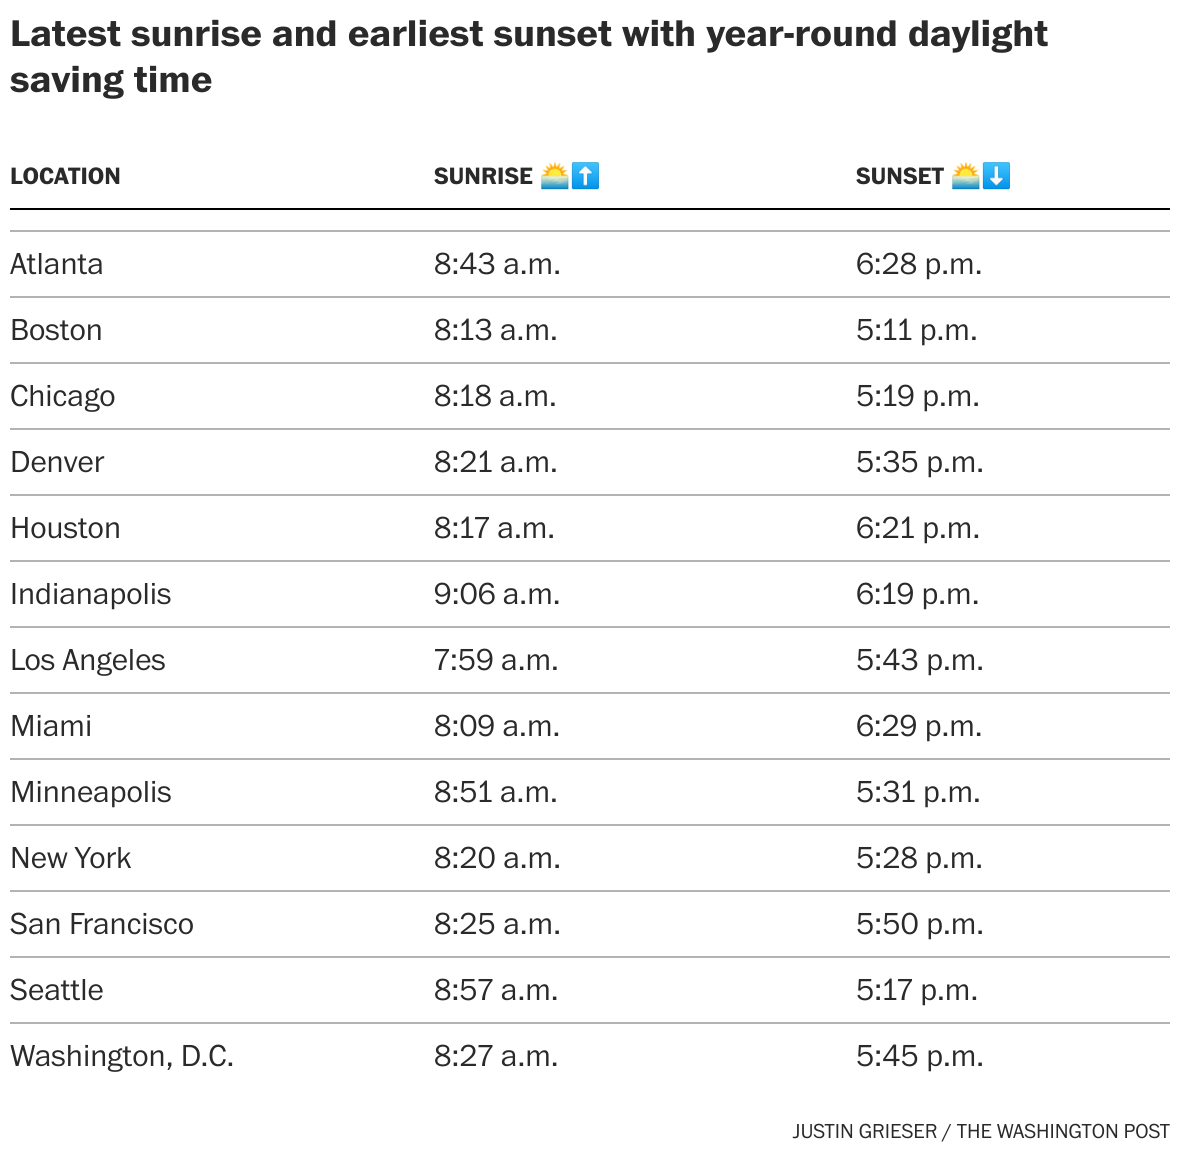 Sunrise/set changes with Daylight Saving Time in Indy